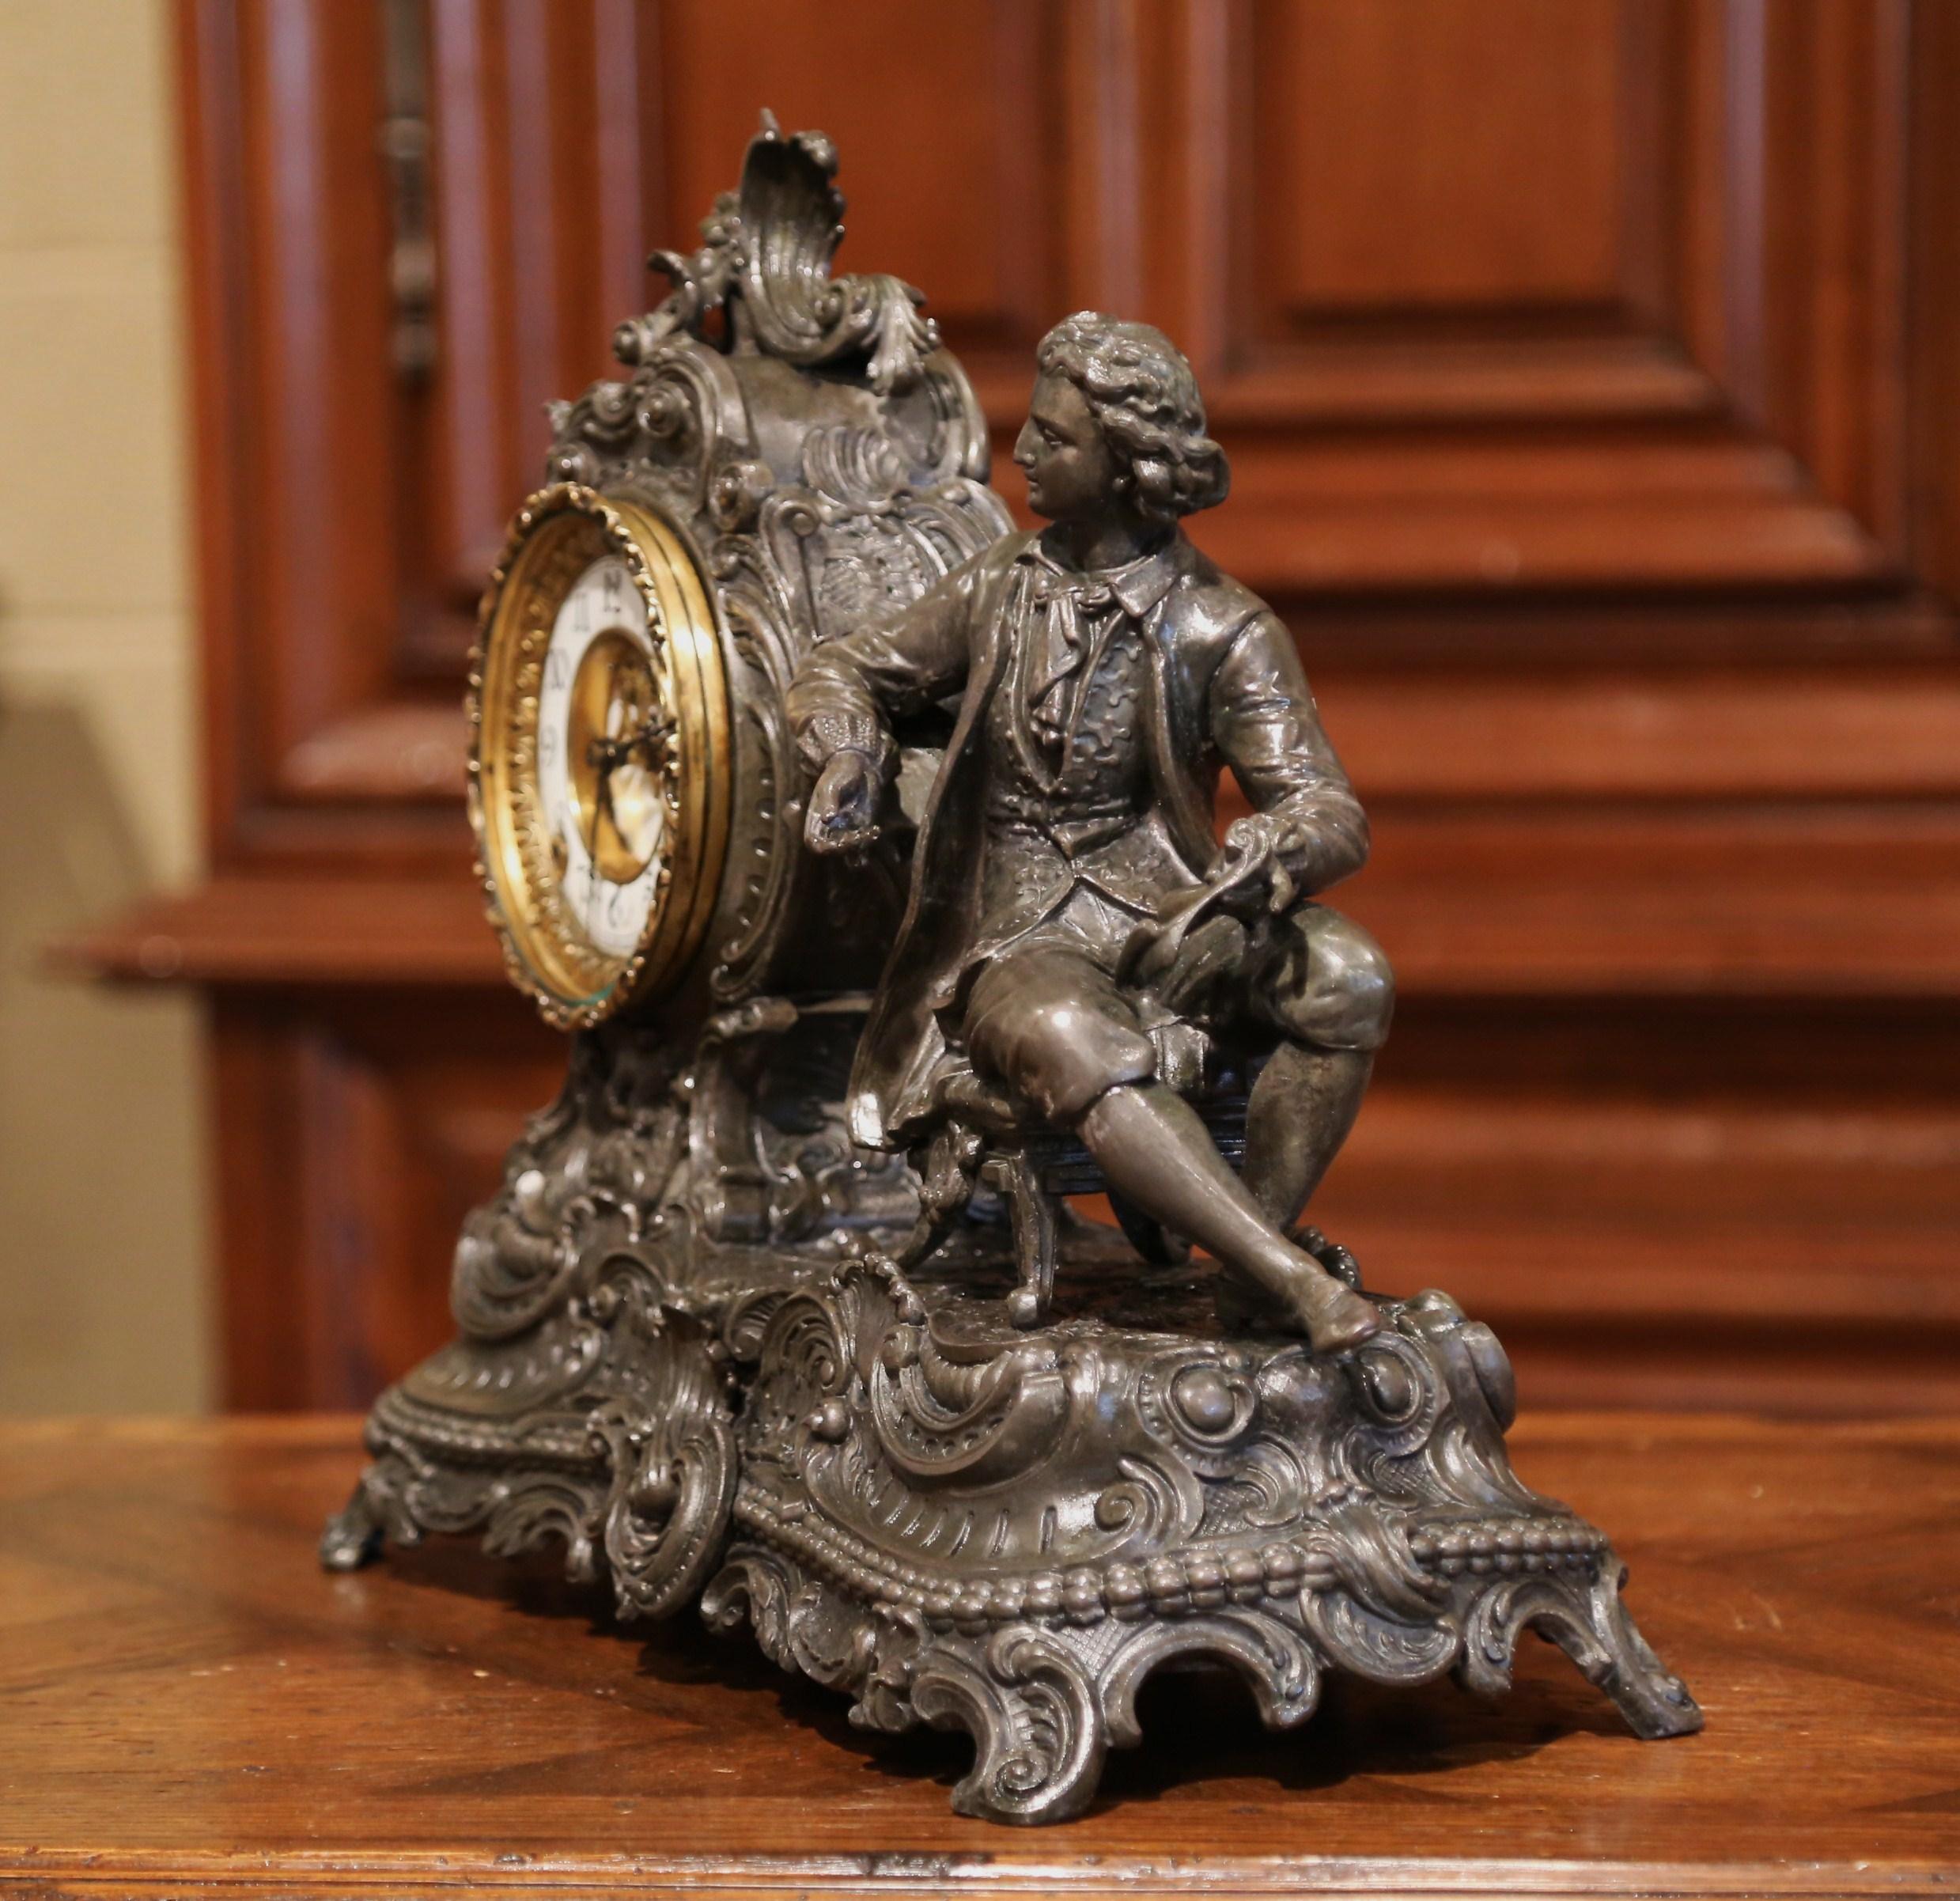 Decorate a mantel with this elegant antique clock, crafted in New York by Ansonia Clock Company and dated 1881, the clock stands on curved feet and features a carved sculpture of the French physicist Denis Papin sited on a chair. The intricate clock